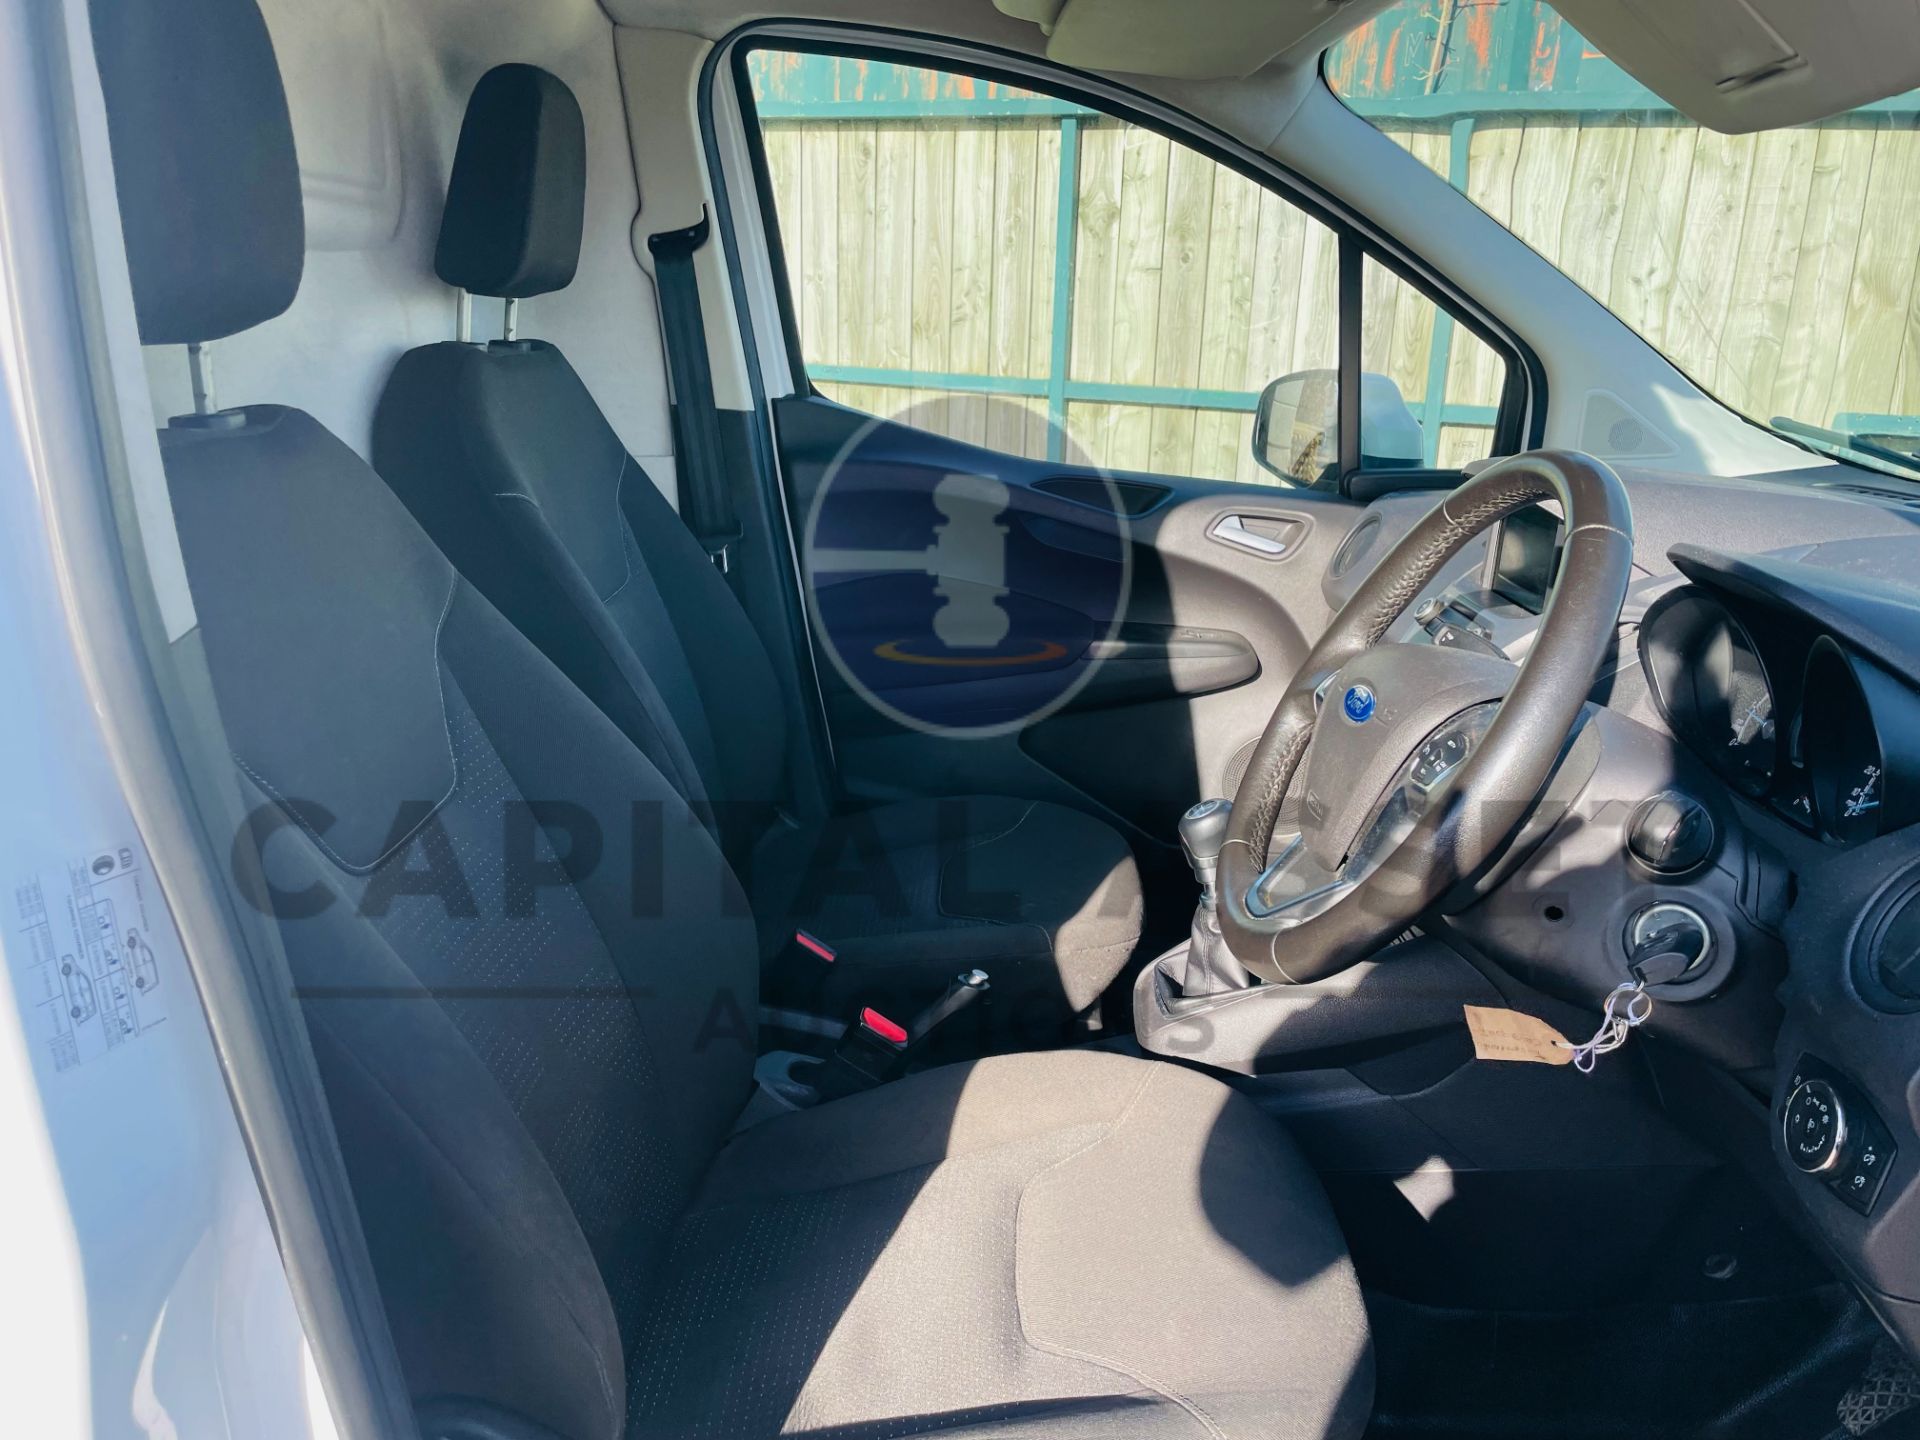 FORD TRANSIT COURIER *LIMITED EDITION* PANEL VAN (2019) '1.5 TDCI - 6 SPEED' A/C & SAT NAV (1 OWNER) - Image 23 of 36